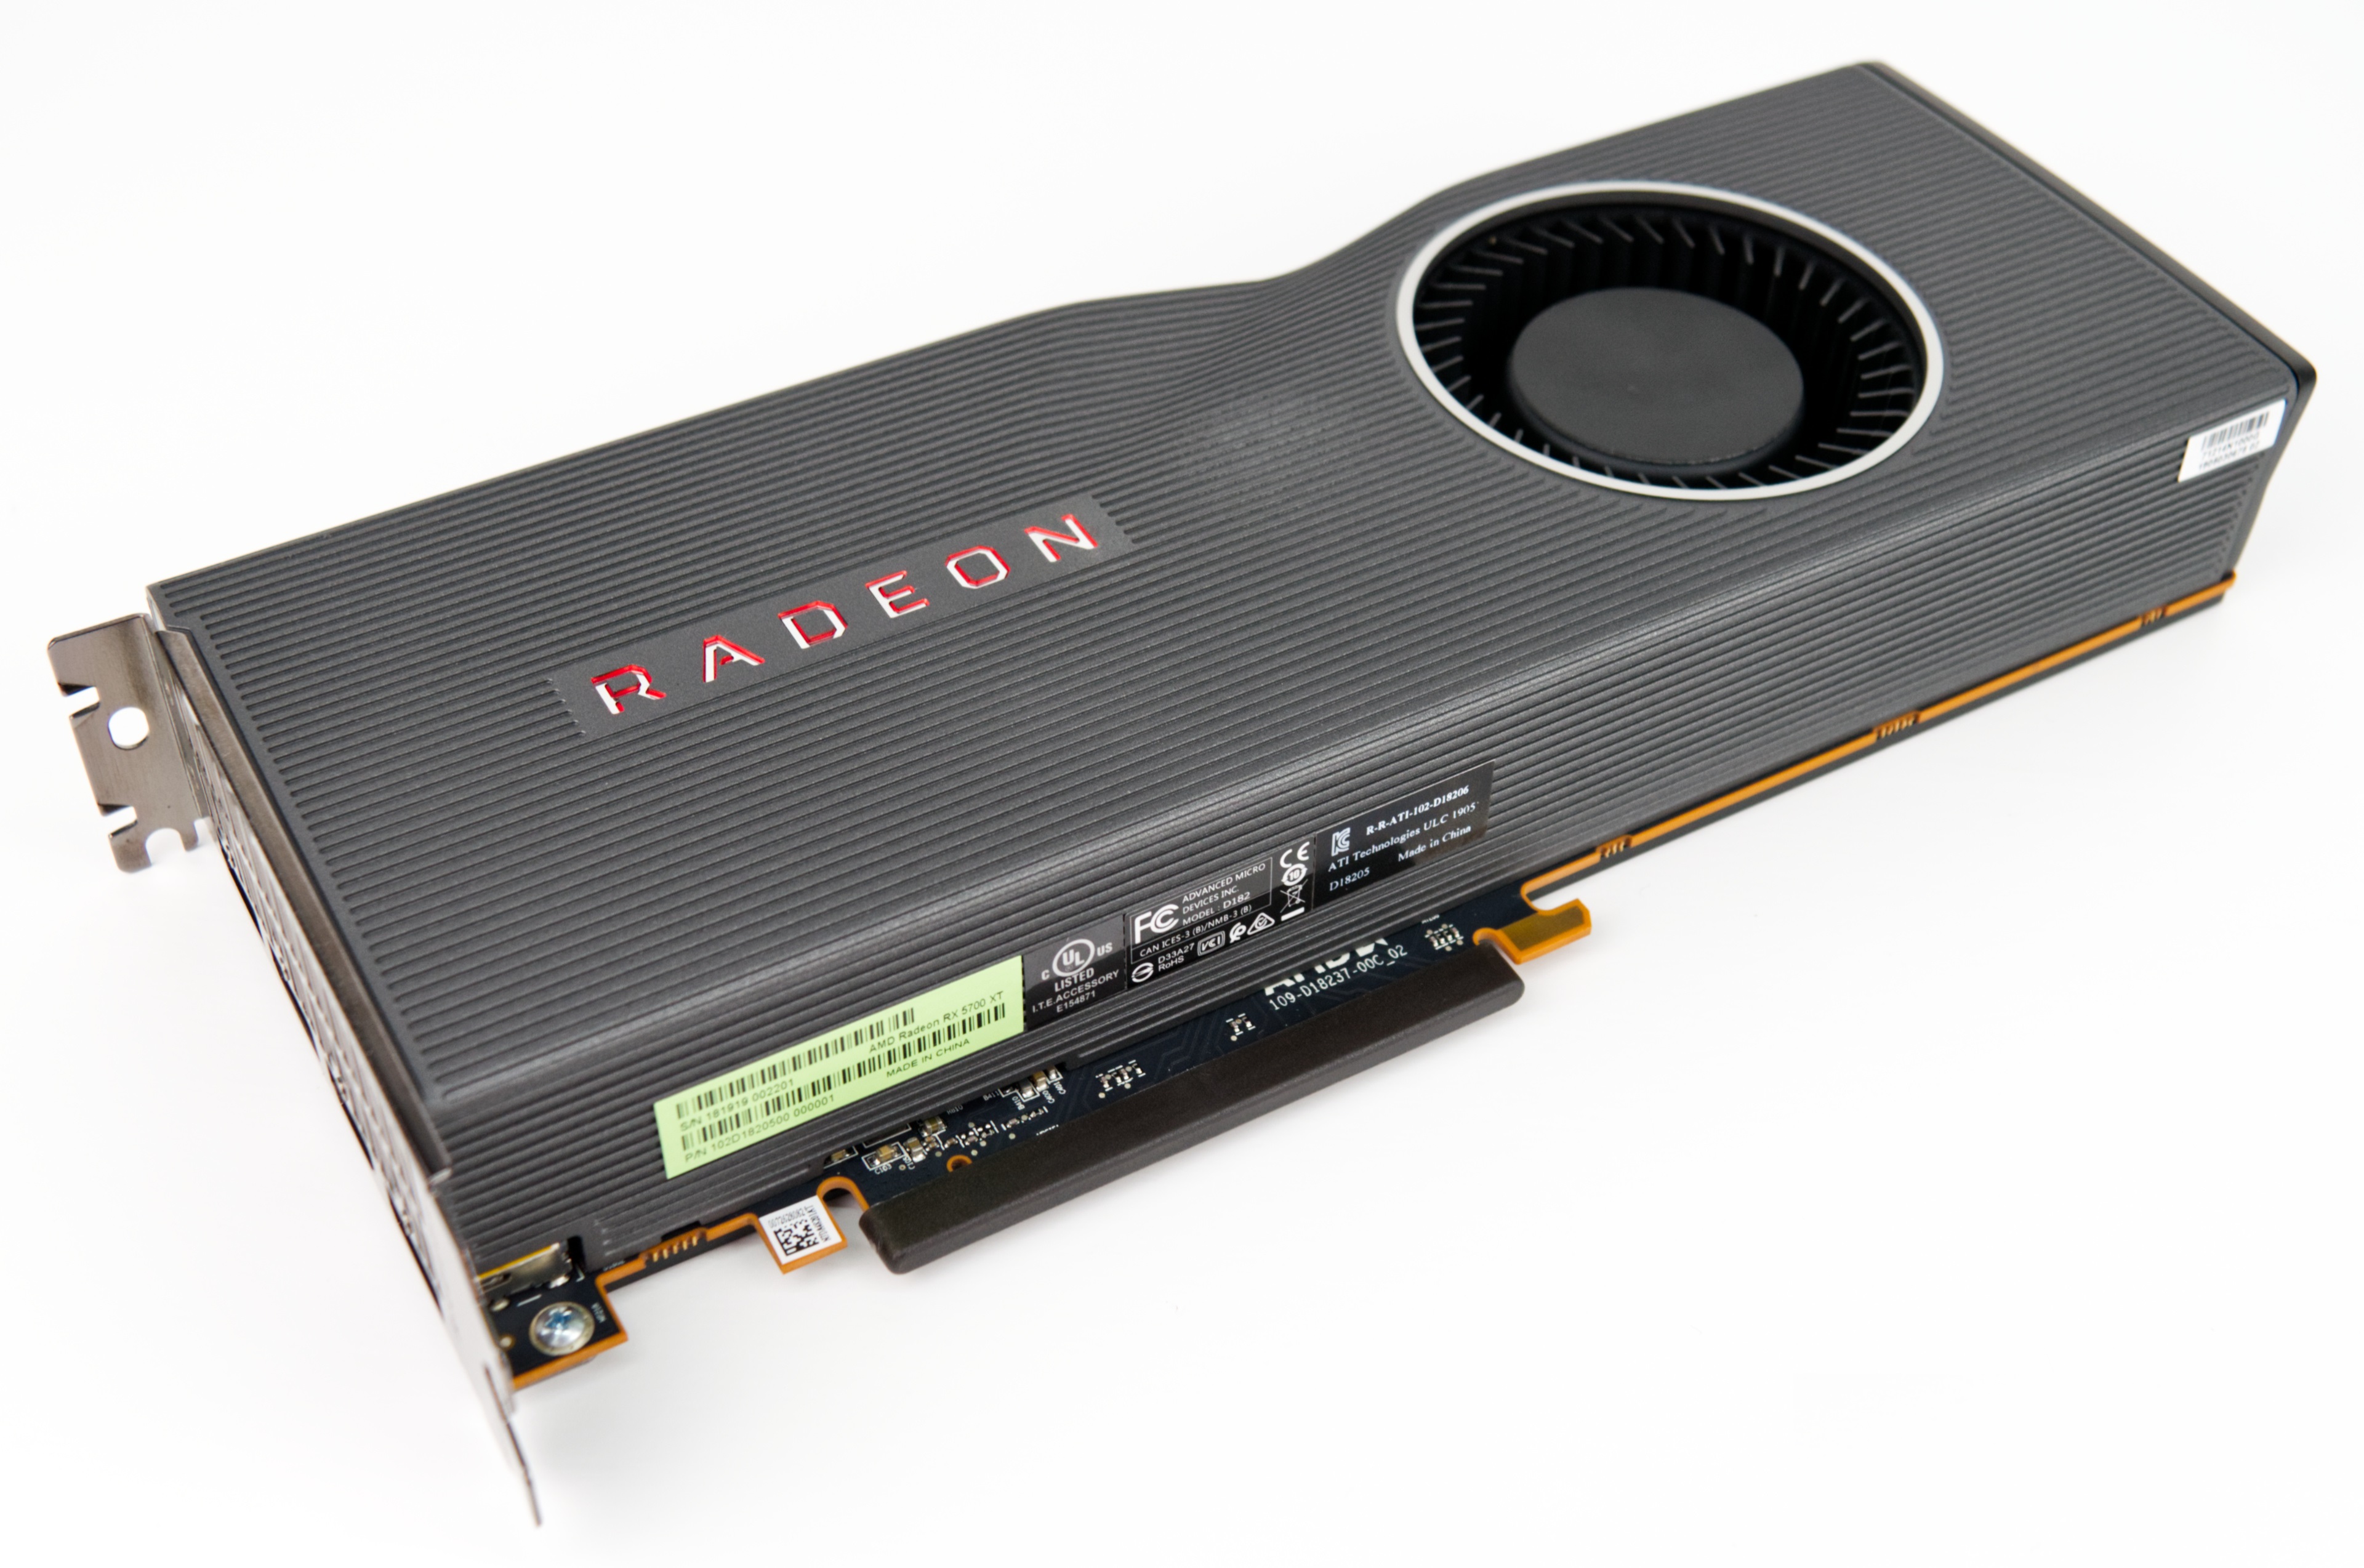 Amd Radeon Rx 5700 Xt Review Known Issues Of The Reference Design Notebookcheck Net Reviews